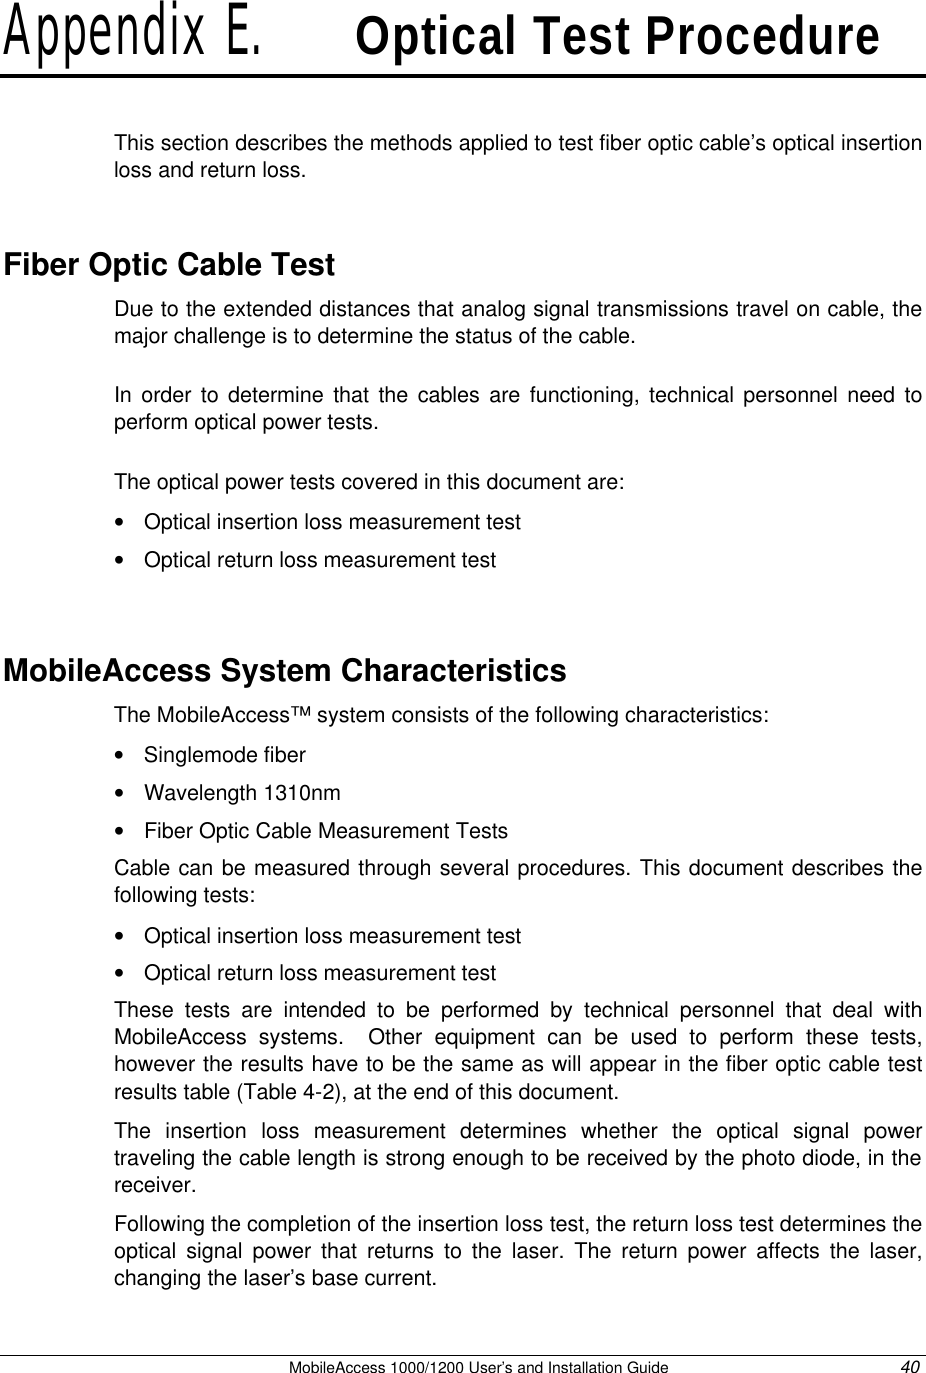   MobileAccess 1000/1200 User’s and Installation Guide 40 Appendix E.   Optical Test Procedure This section describes the methods applied to test fiber optic cable’s optical insertion loss and return loss.  Fiber Optic Cable Test Due to the extended distances that analog signal transmissions travel on cable, the major challenge is to determine the status of the cable.  In order to determine that the cables are functioning, technical personnel need to perform optical power tests.  The optical power tests covered in this document are: • Optical insertion loss measurement test • Optical return loss measurement test  MobileAccess System Characteristics The MobileAccess™ system consists of the following characteristics: • Singlemode fiber • Wavelength 1310nm • Fiber Optic Cable Measurement Tests Cable can be measured through several procedures. This document describes the following tests: • Optical insertion loss measurement test  • Optical return loss measurement test These tests are intended to be performed by technical personnel that deal with MobileAccess systems.  Other equipment can be used to perform these tests, however the results have to be the same as will appear in the fiber optic cable test results table (Table 4-2), at the end of this document.  The insertion loss measurement determines whether the optical signal power traveling the cable length is strong enough to be received by the photo diode, in the receiver. Following the completion of the insertion loss test, the return loss test determines the optical signal power that returns to the laser. The return power affects the laser, changing the laser’s base current.  